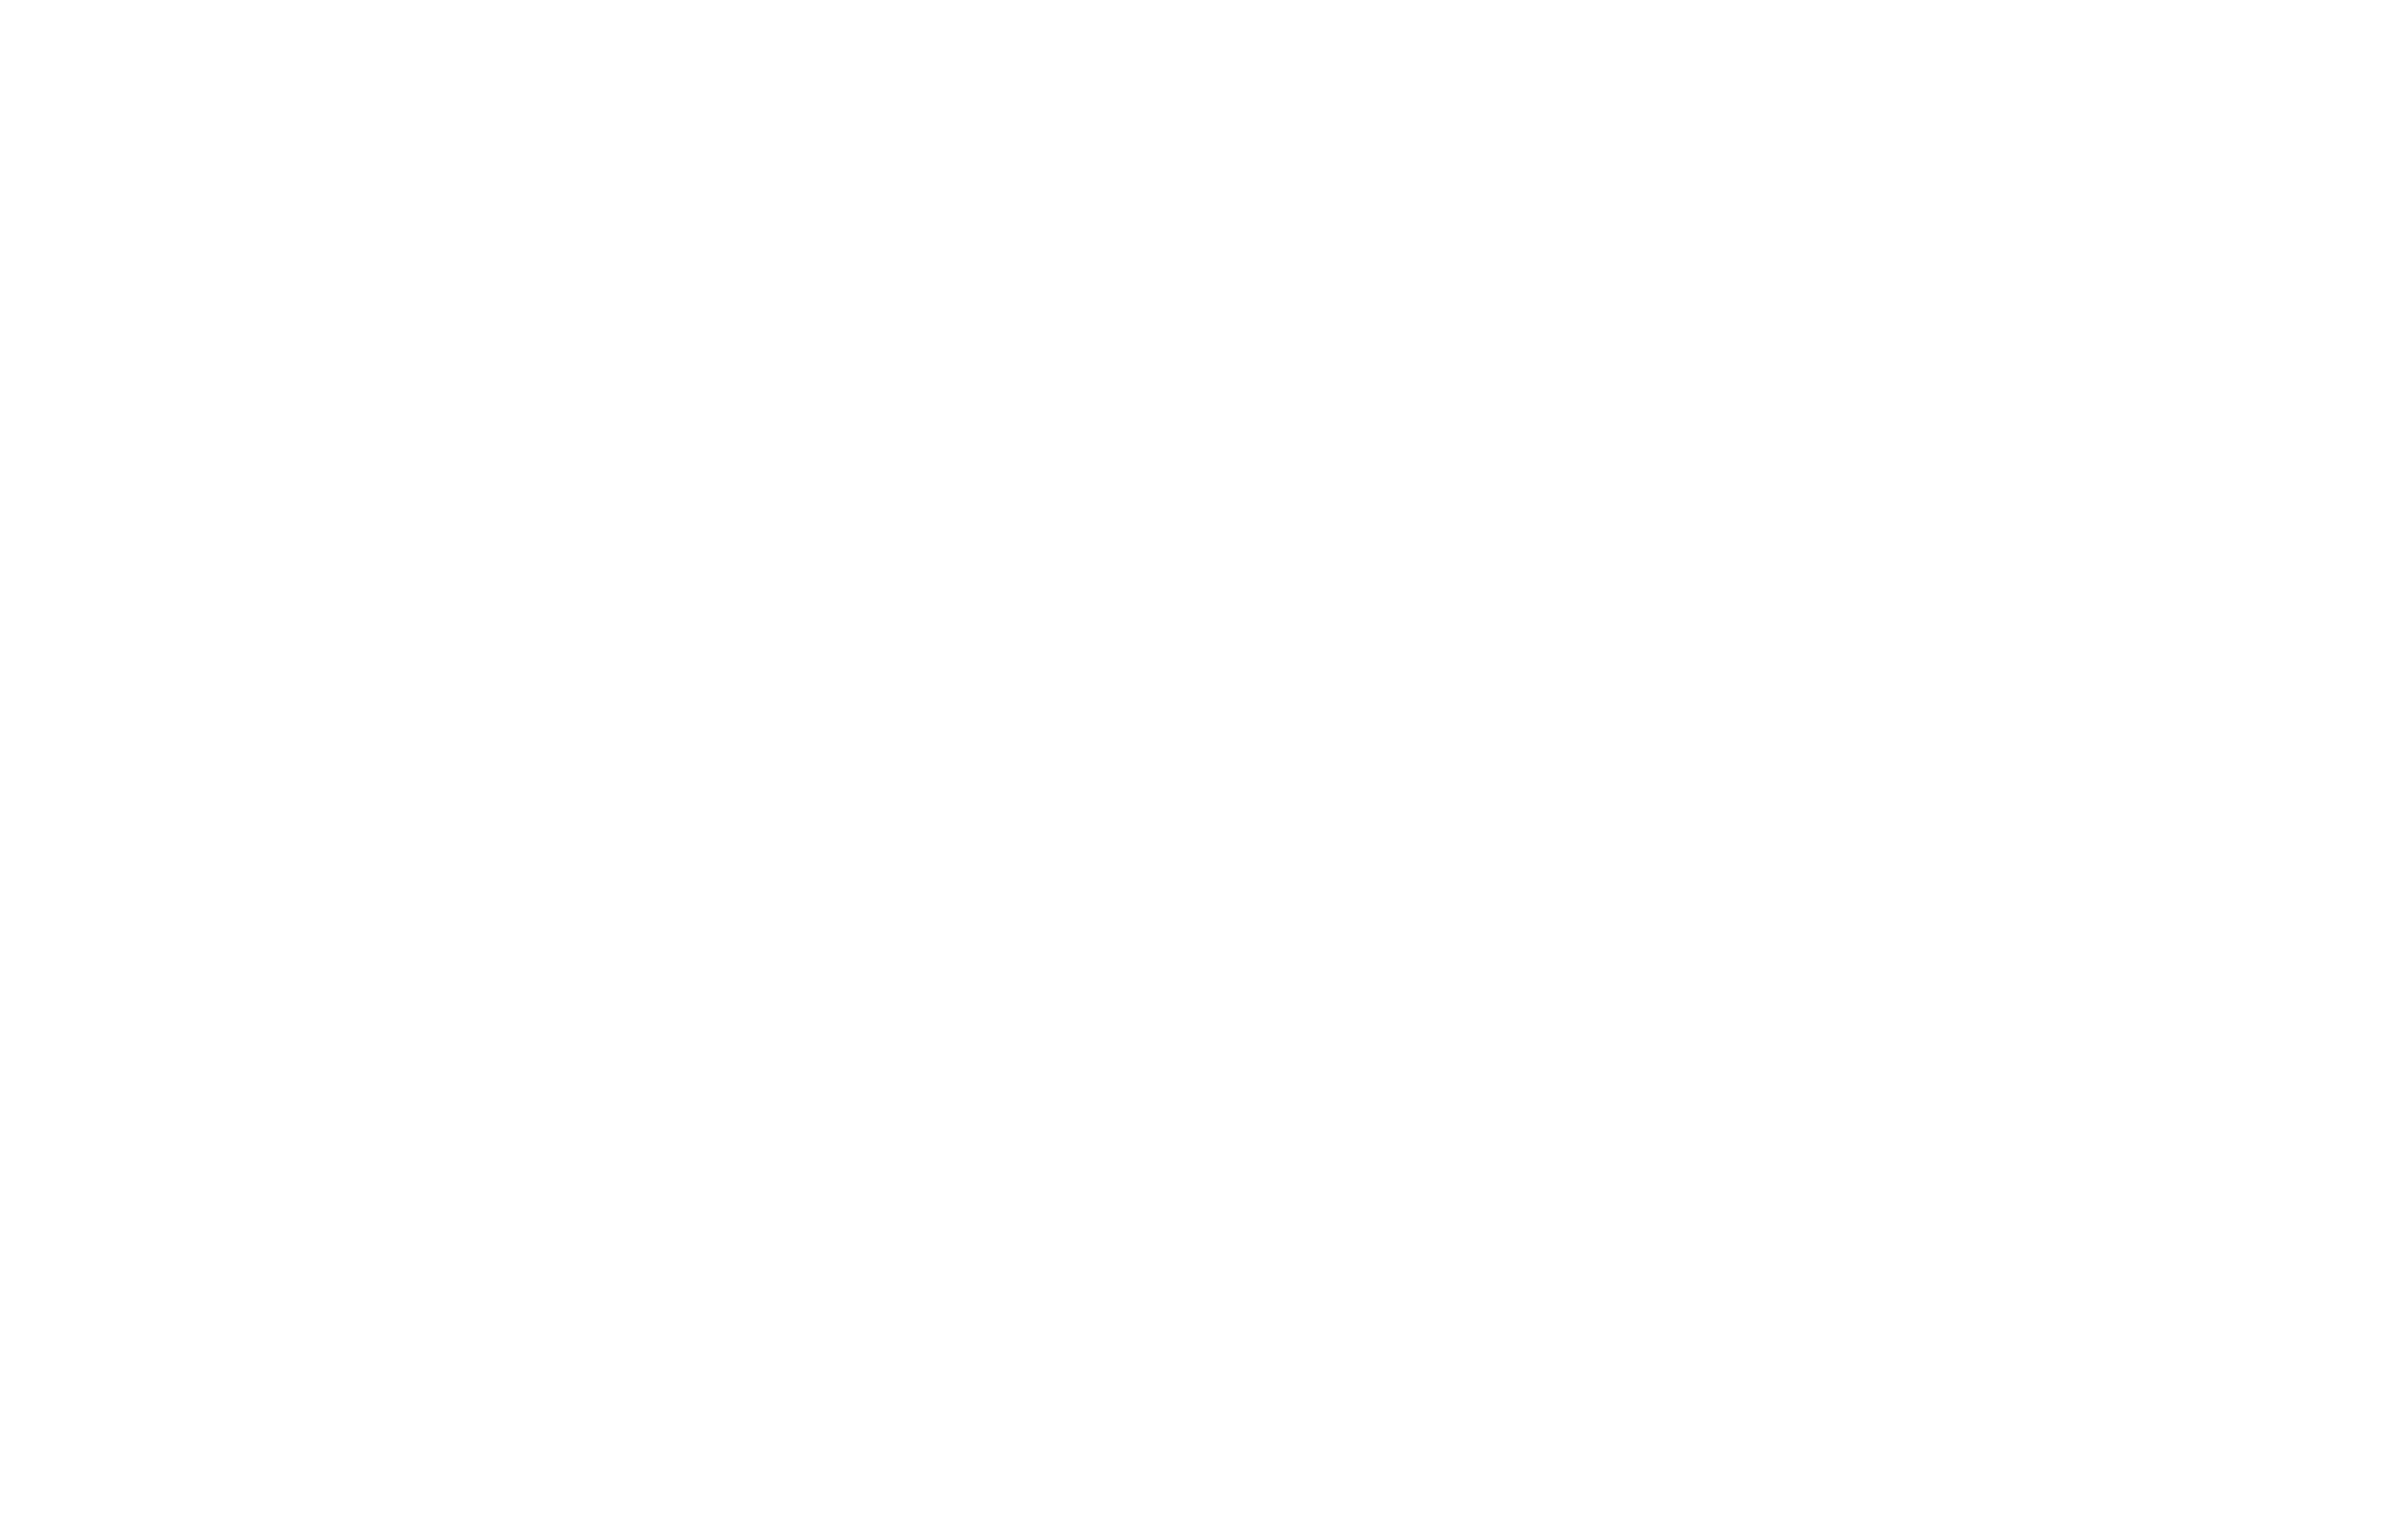 Library of Distilled Spirits: Landing Page Home